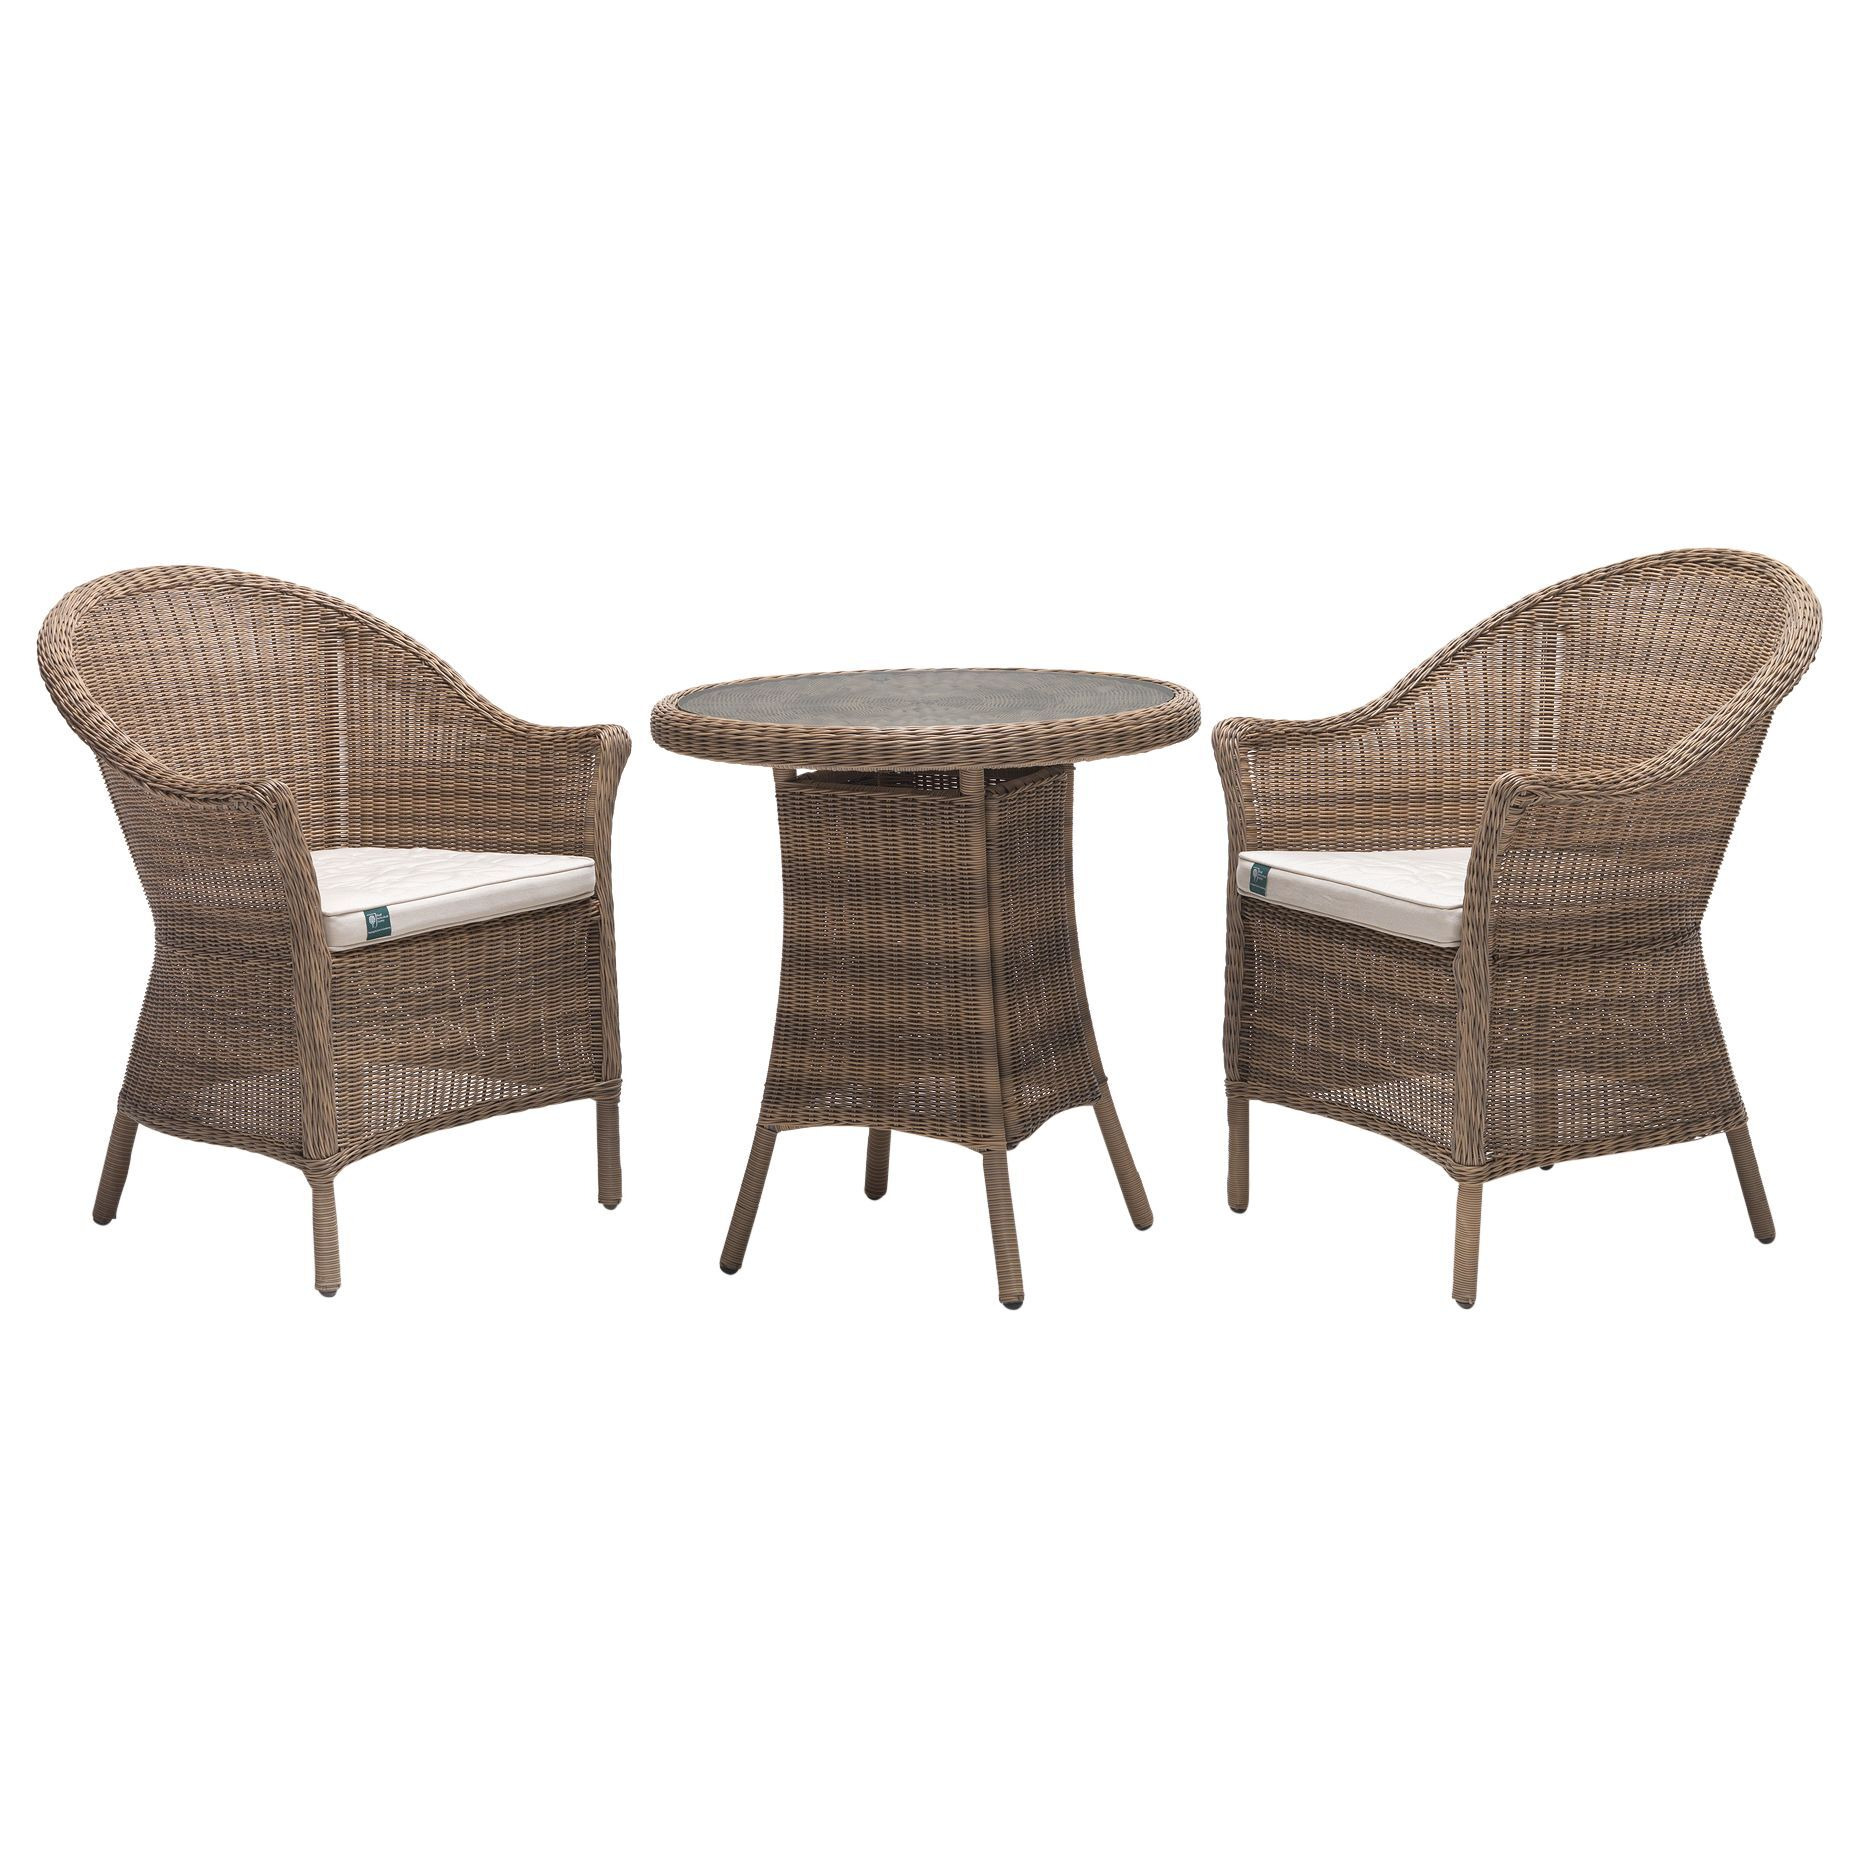 KETTLER RHS Harlow Carr Garden Bistro Table and Chairs Set, Natural - image 1